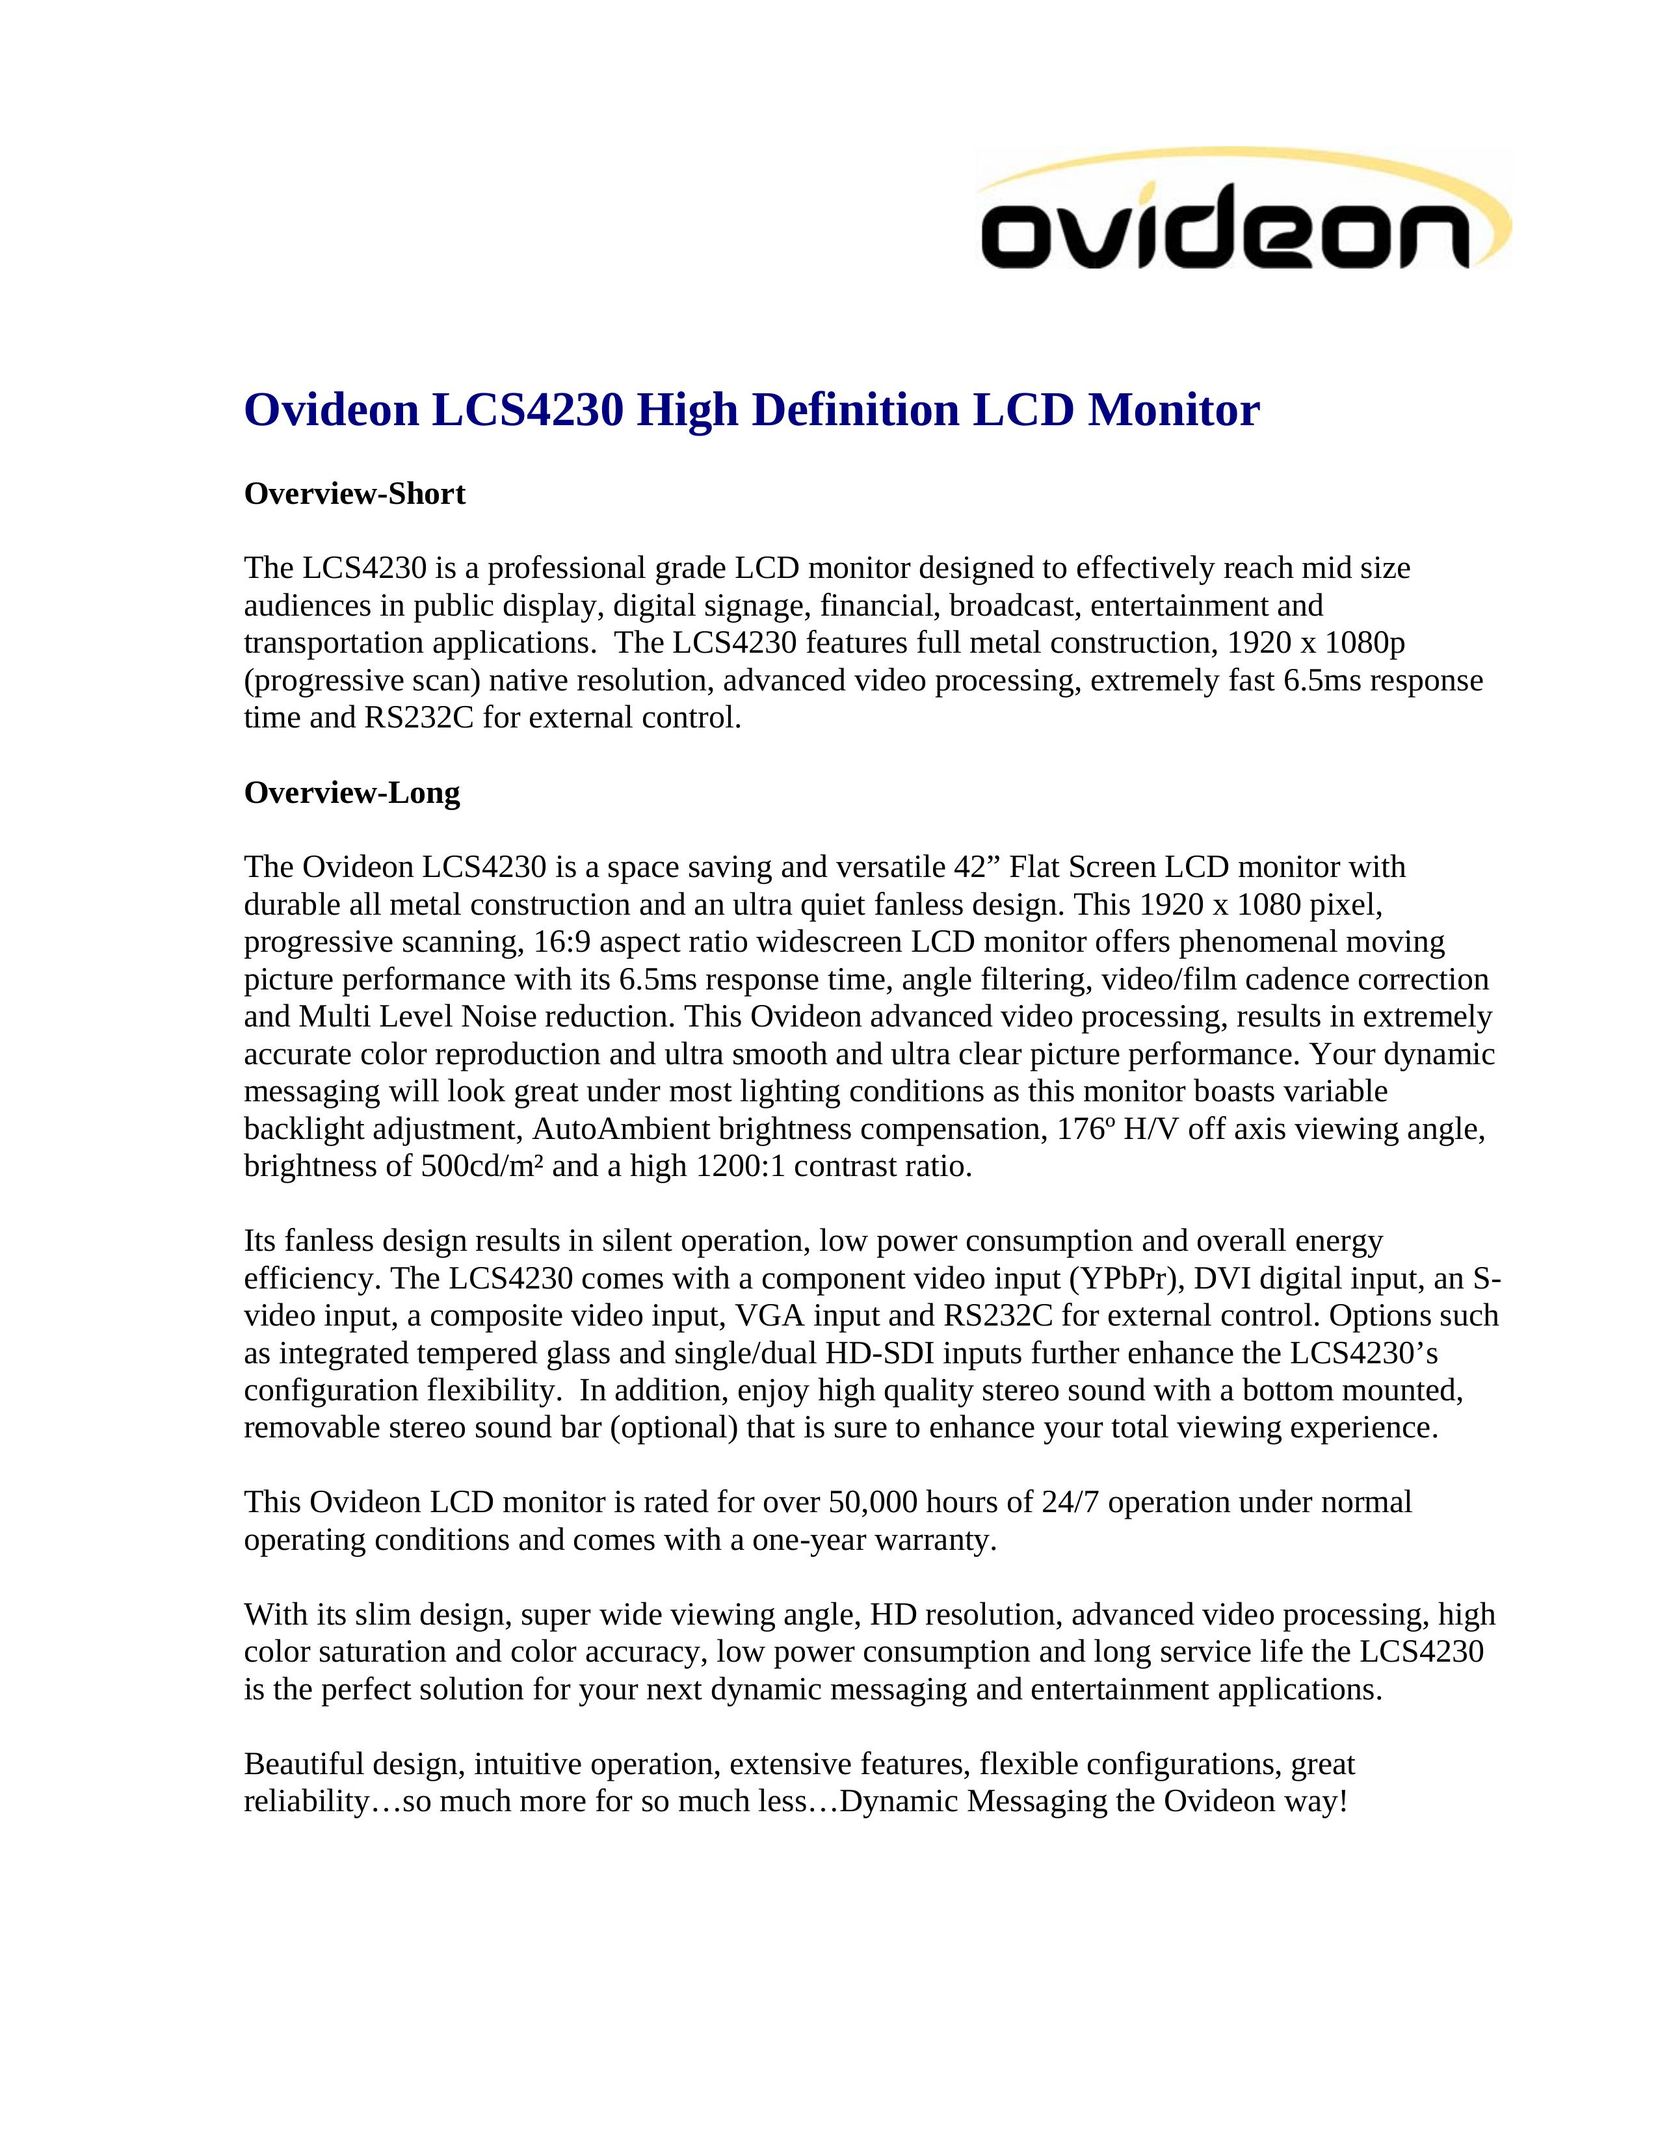 Ovideon LCS4230 Car Video System User Manual